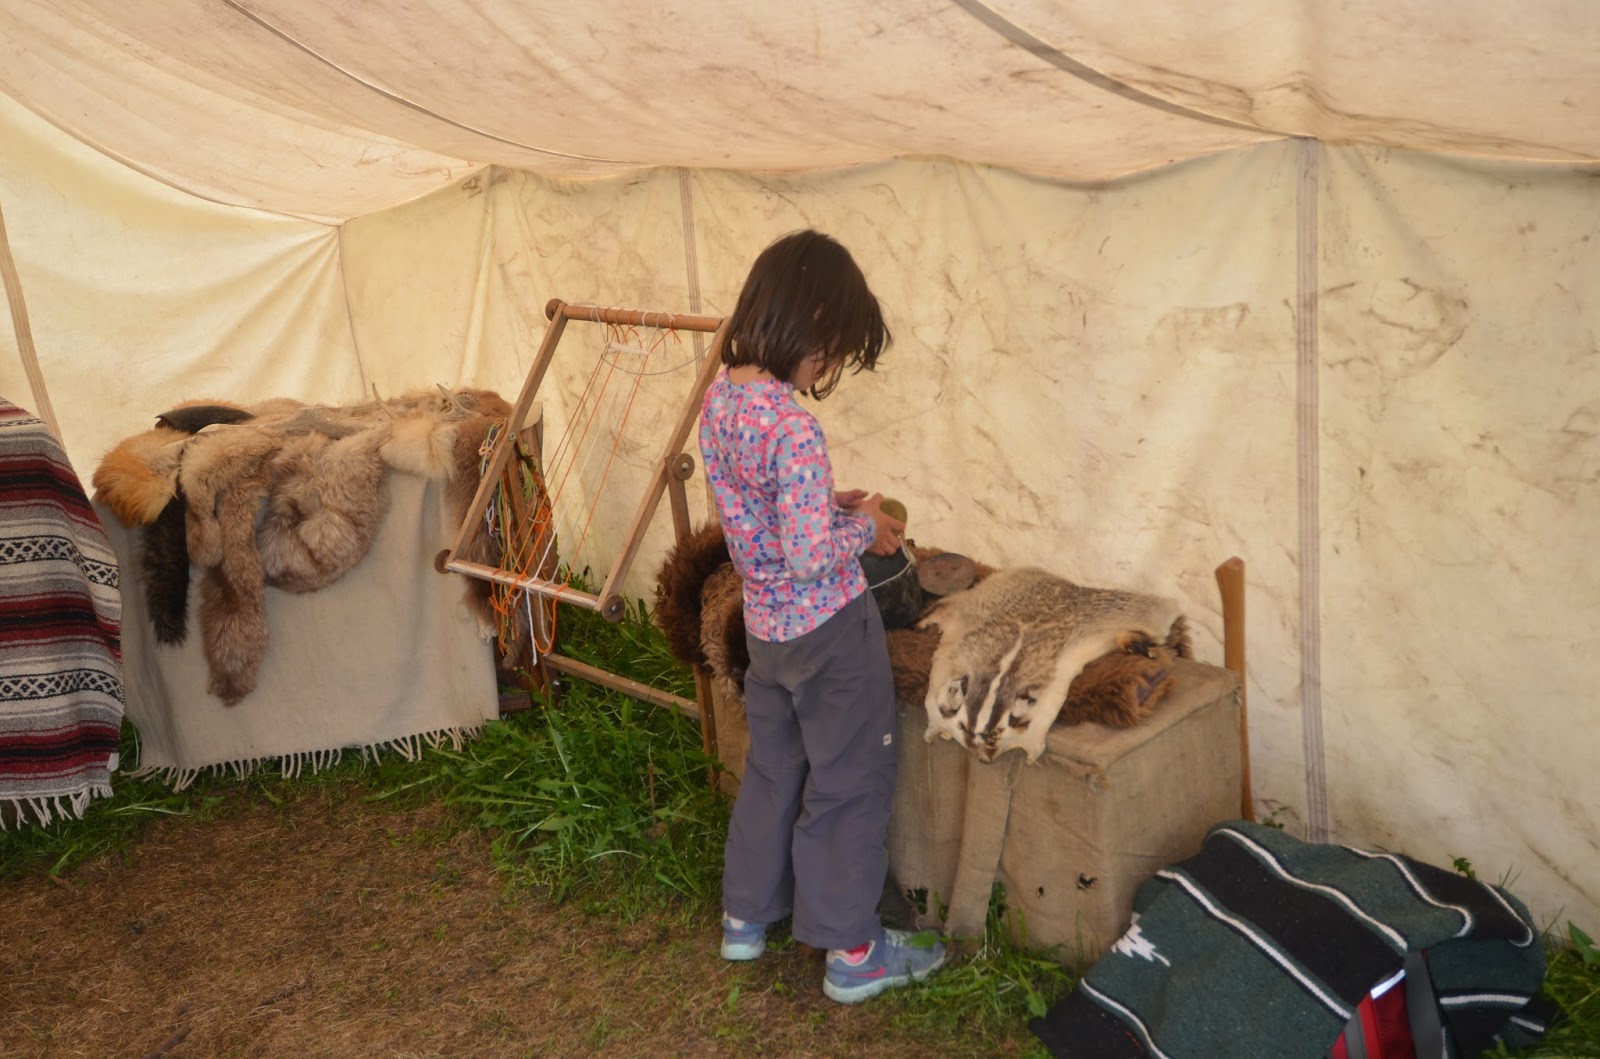 Rocky-mountain-house-national-historic-site-trappers-tent-4